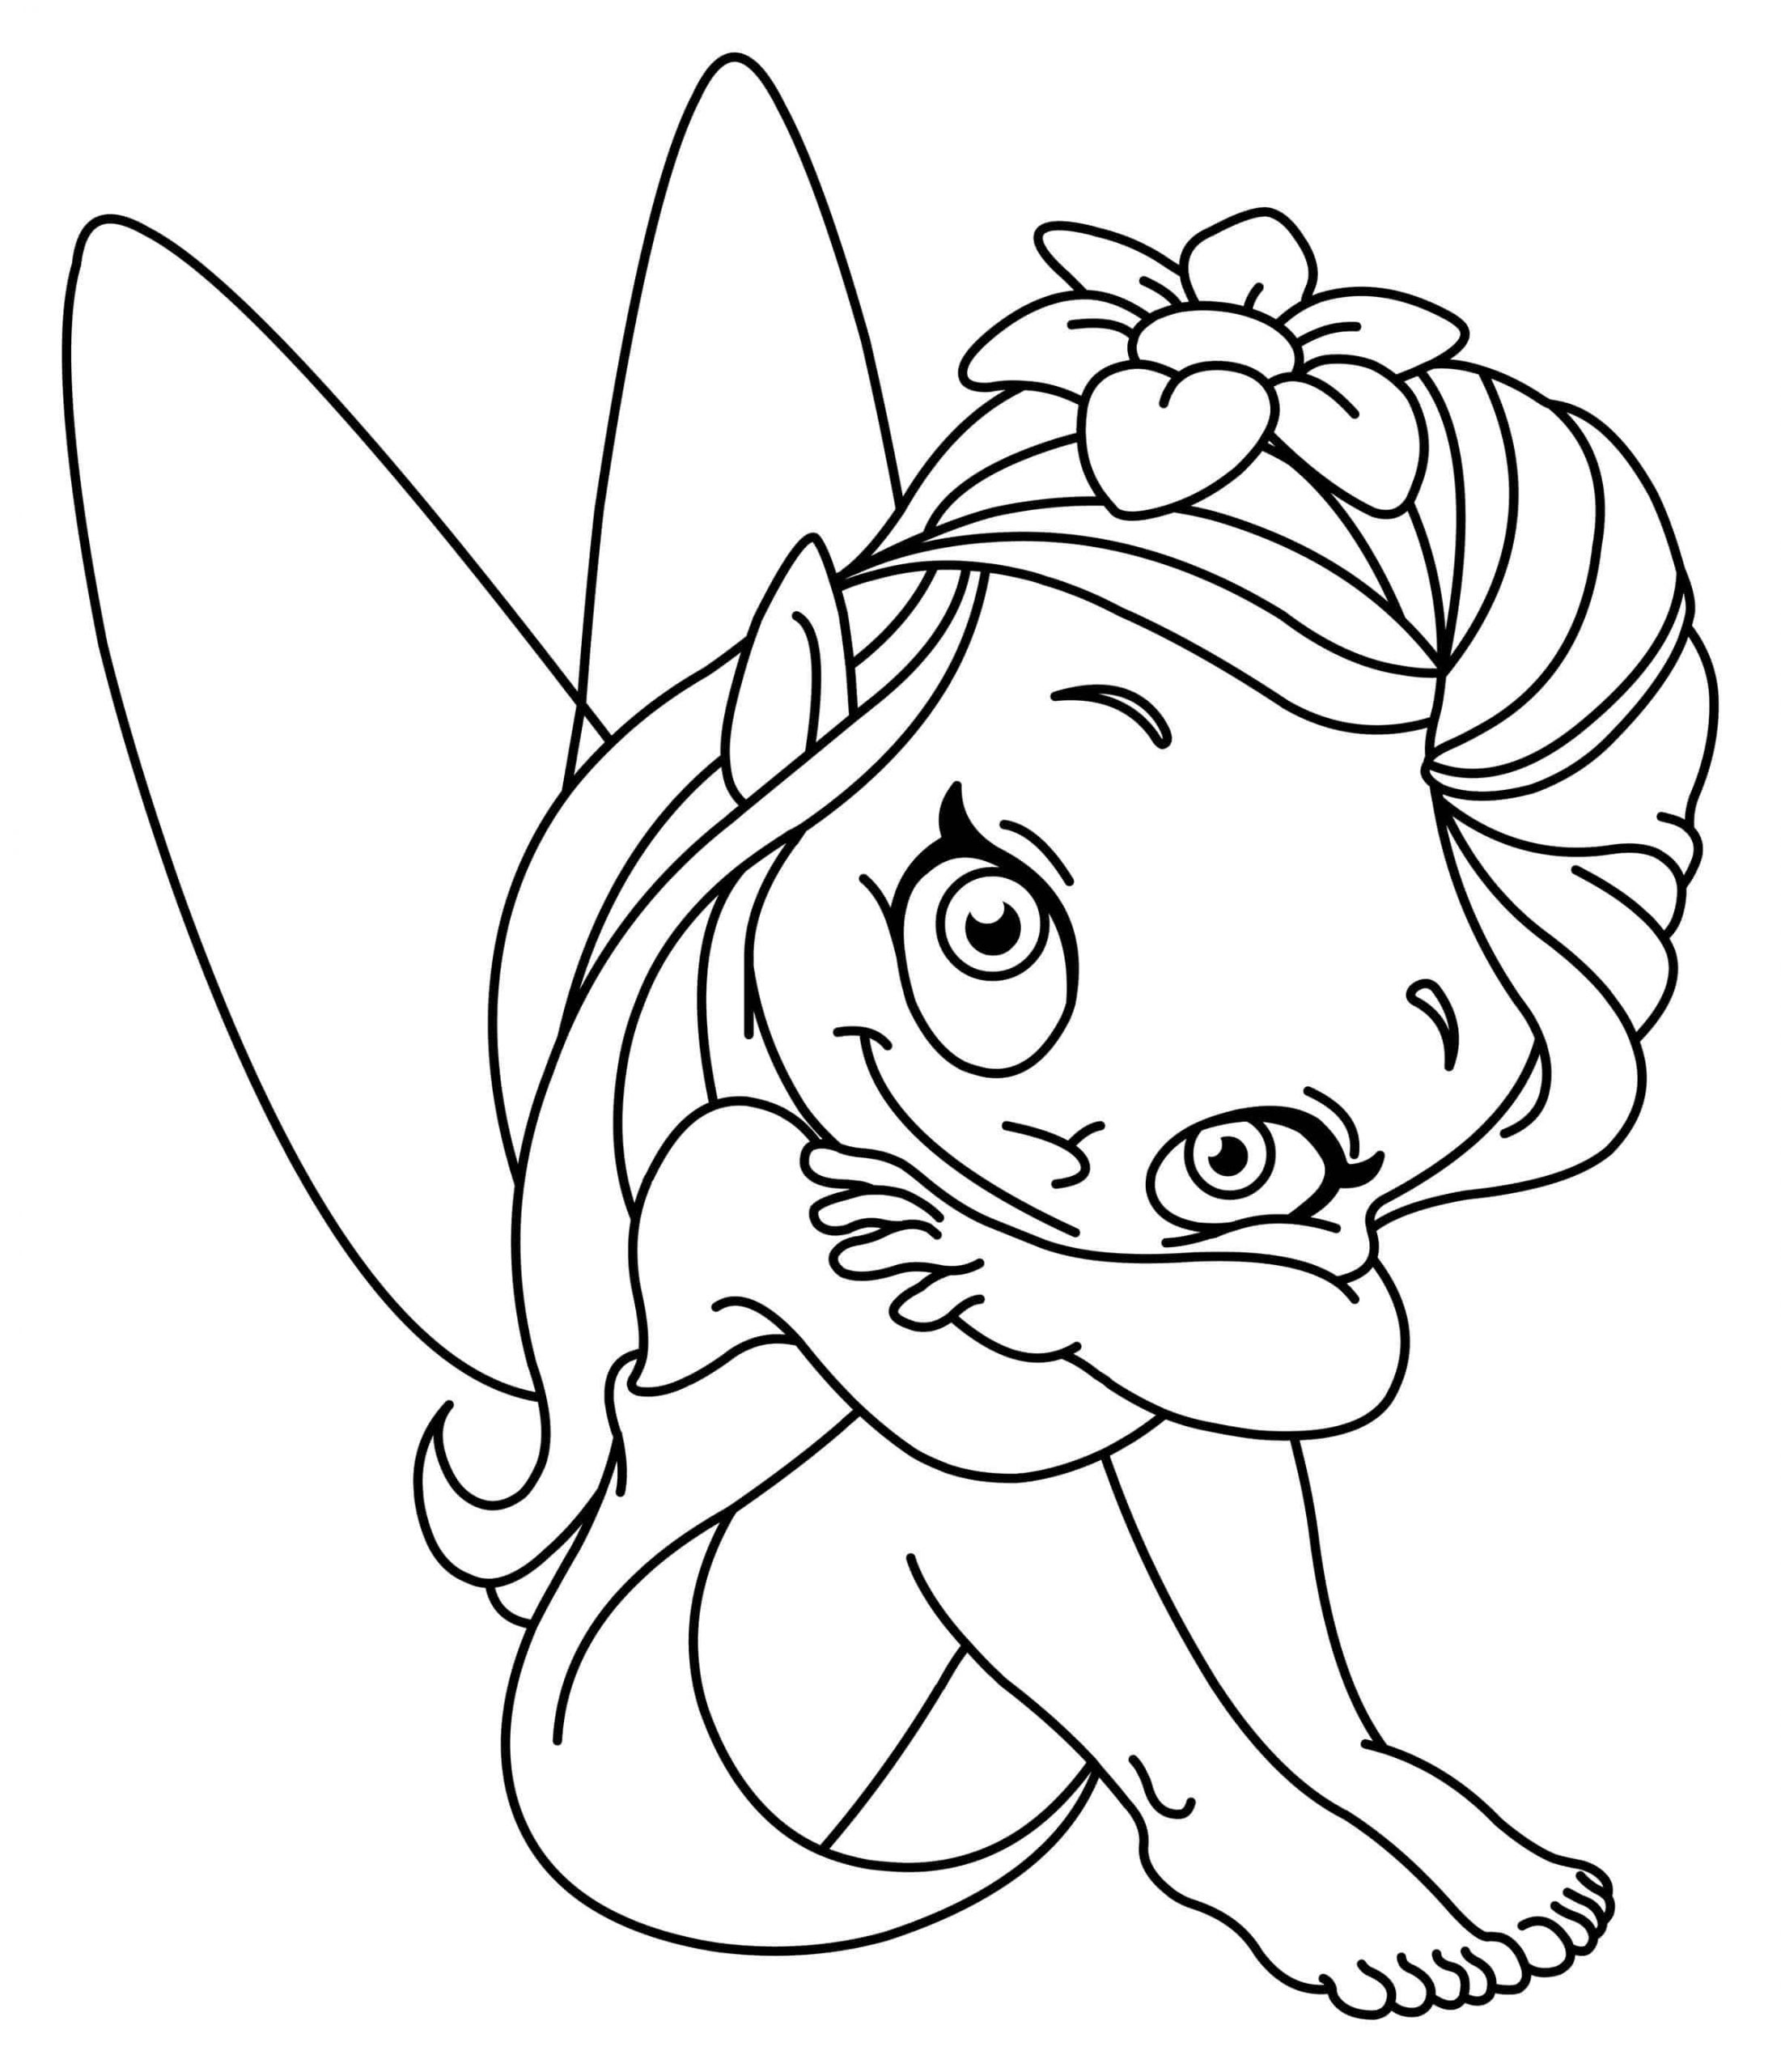 Free Coloring Pages For Girls
 The Best Free Coloring Pages For Girls